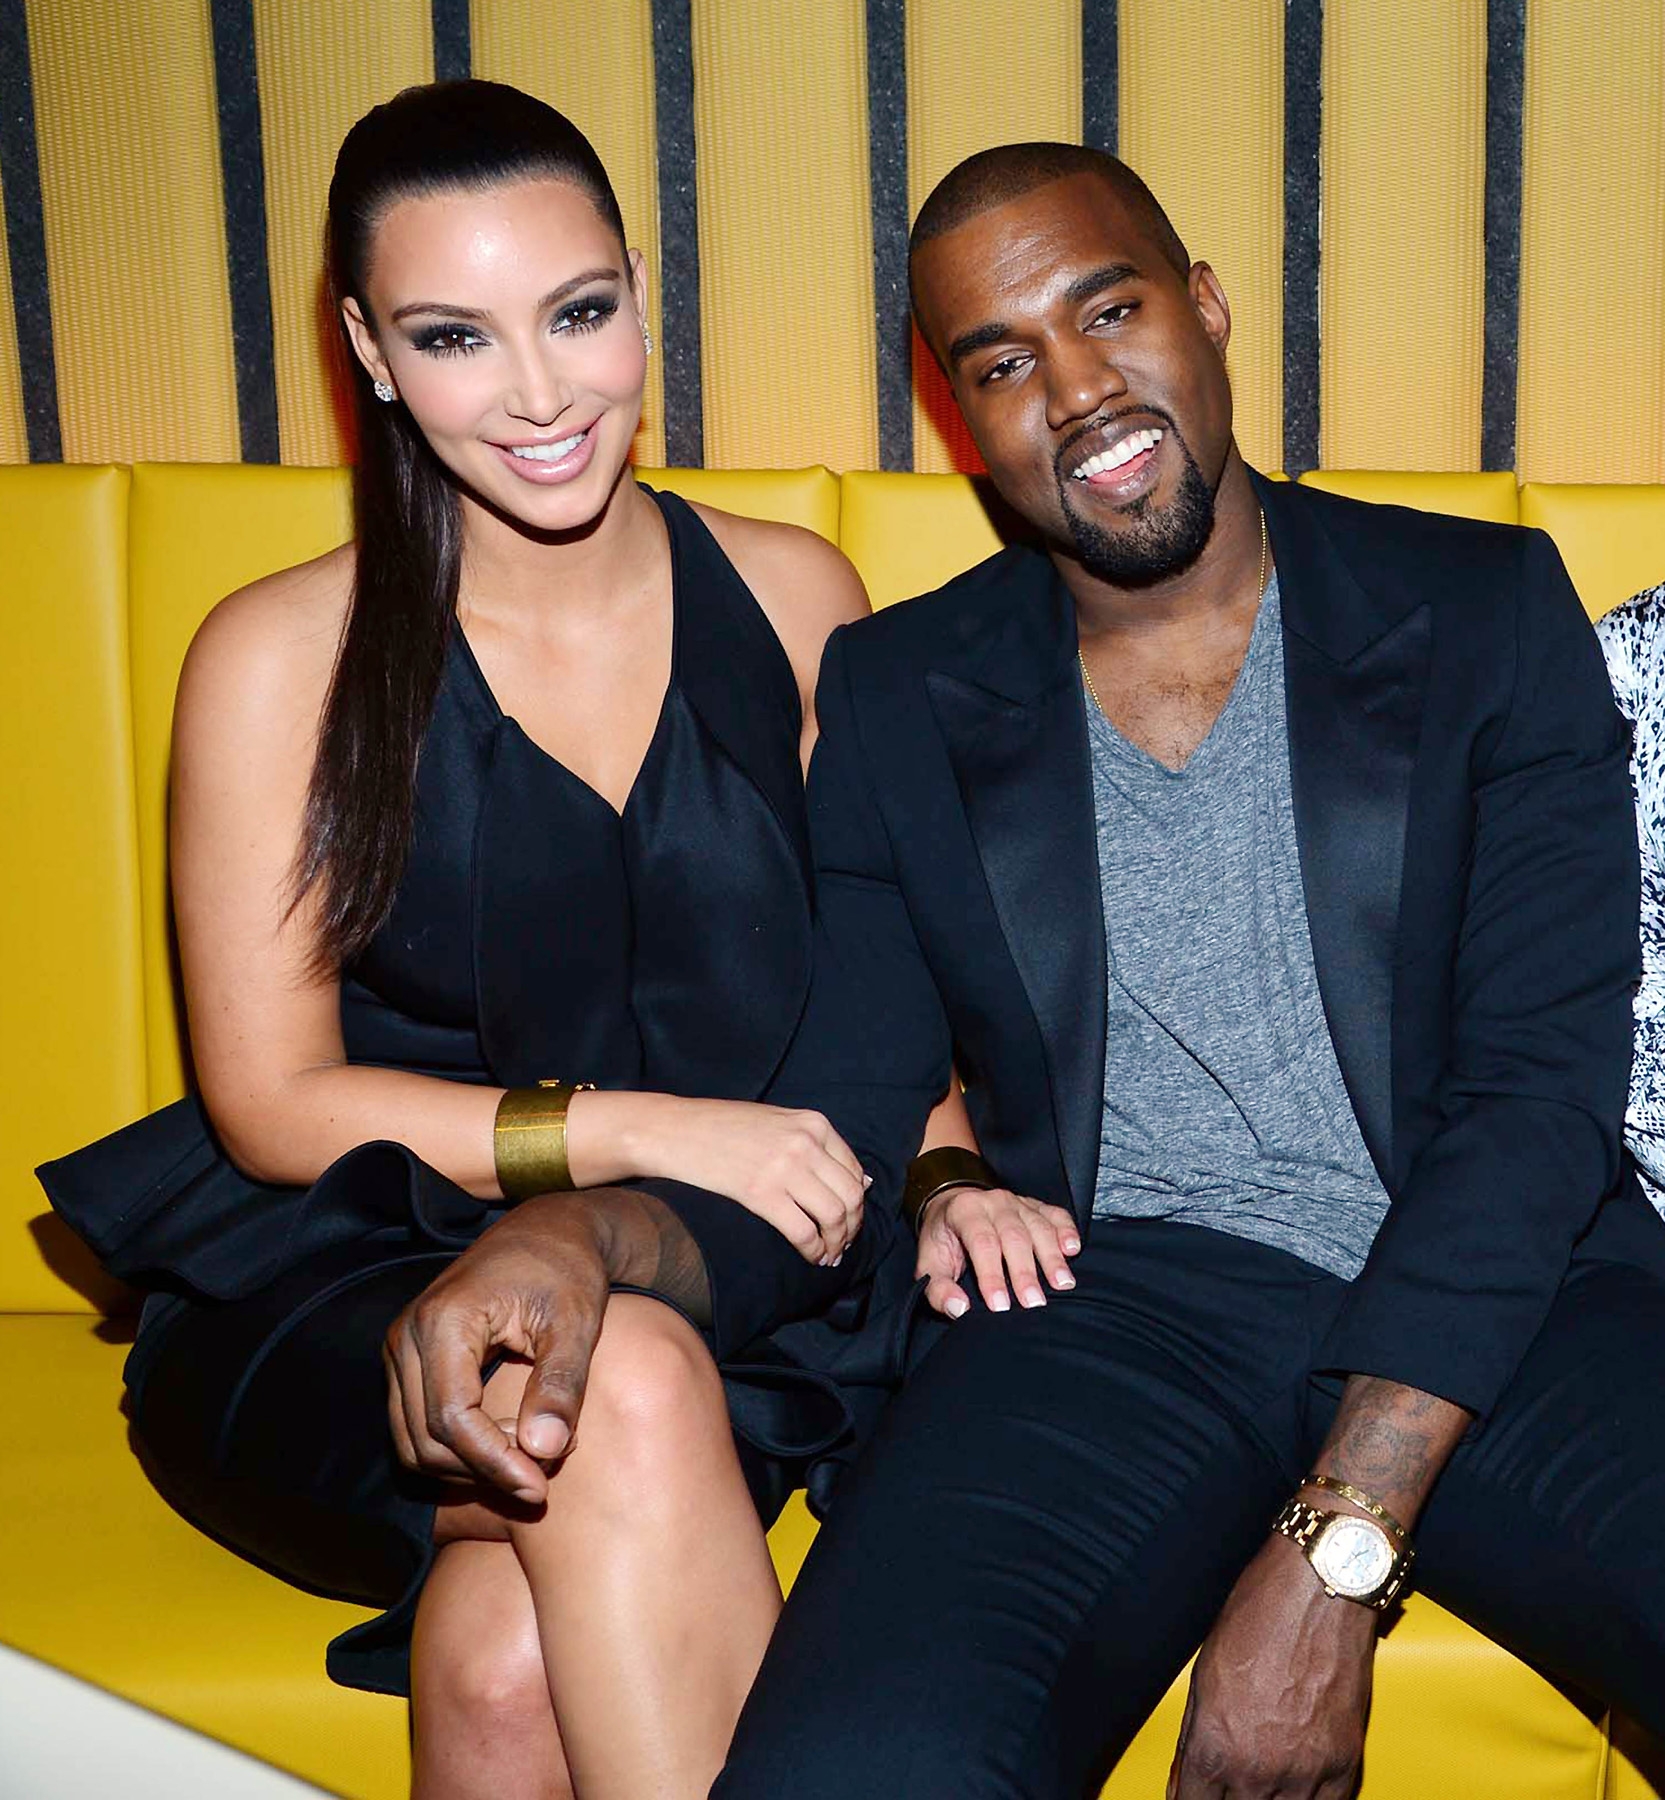 Kanye will never marry Kim},{Kanye will never marry Kim